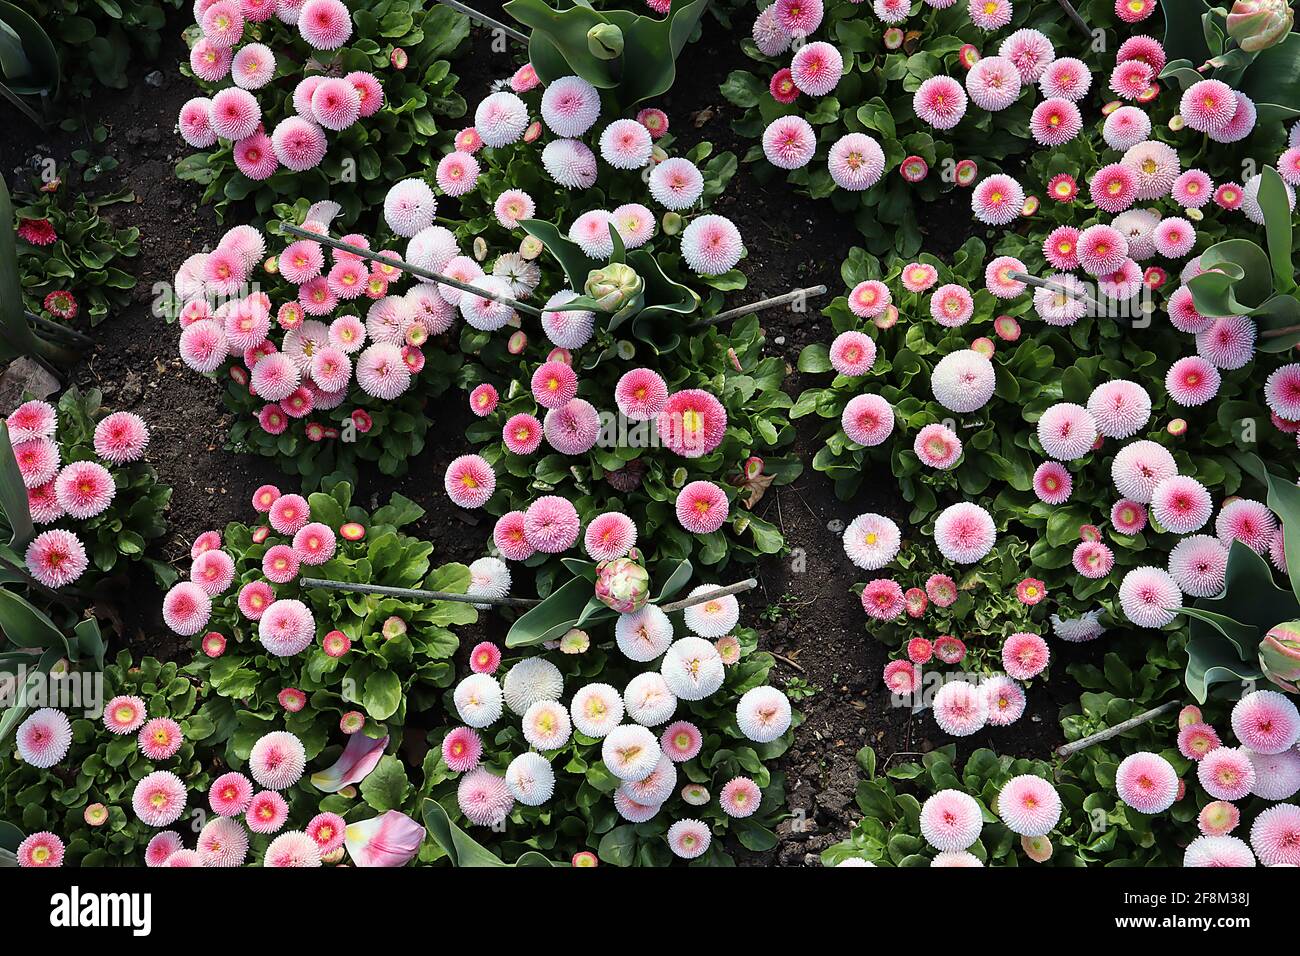 Bellis perennis pomponette ‘Bellissima Rose Bicolor’ Bellis bicolor – pink and white round flowers with tightly quilled petals, April, England, UK Stock Photo